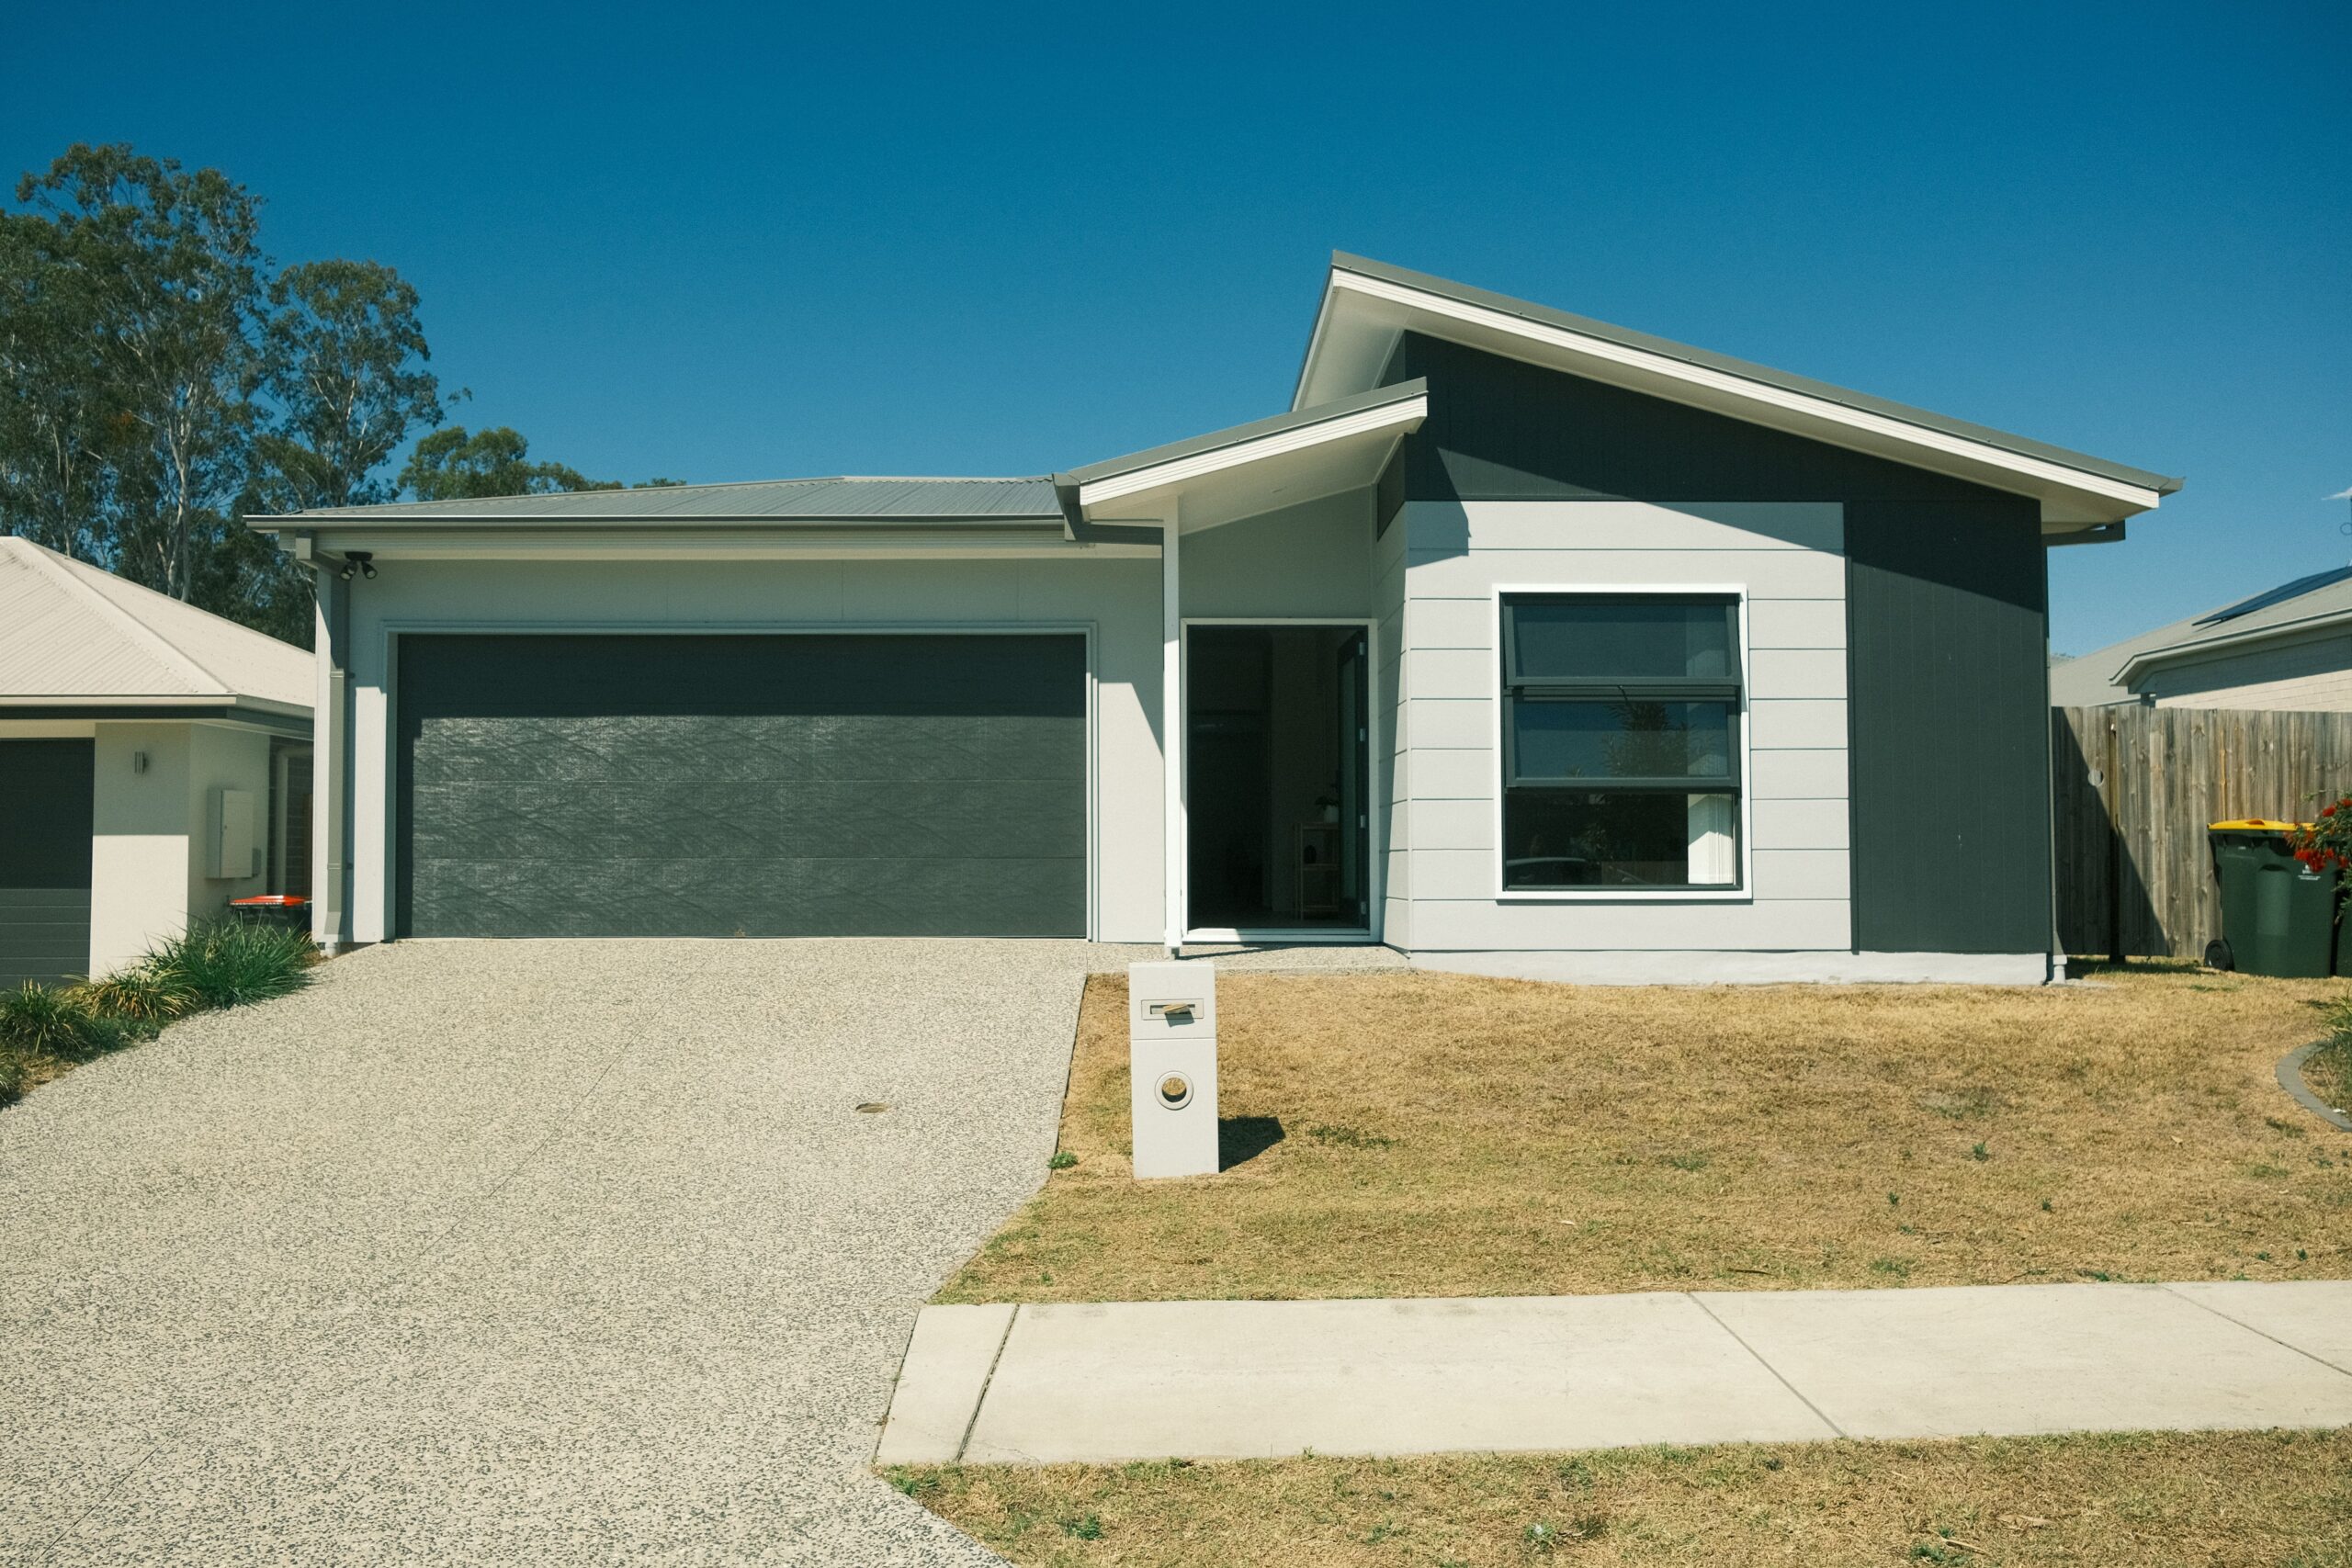 Front of Home - there is a driveway sloping upwards towards a garage on the left of the image. On the right, there is the front door and a bedroom window. There is a small front yard with a lawn.